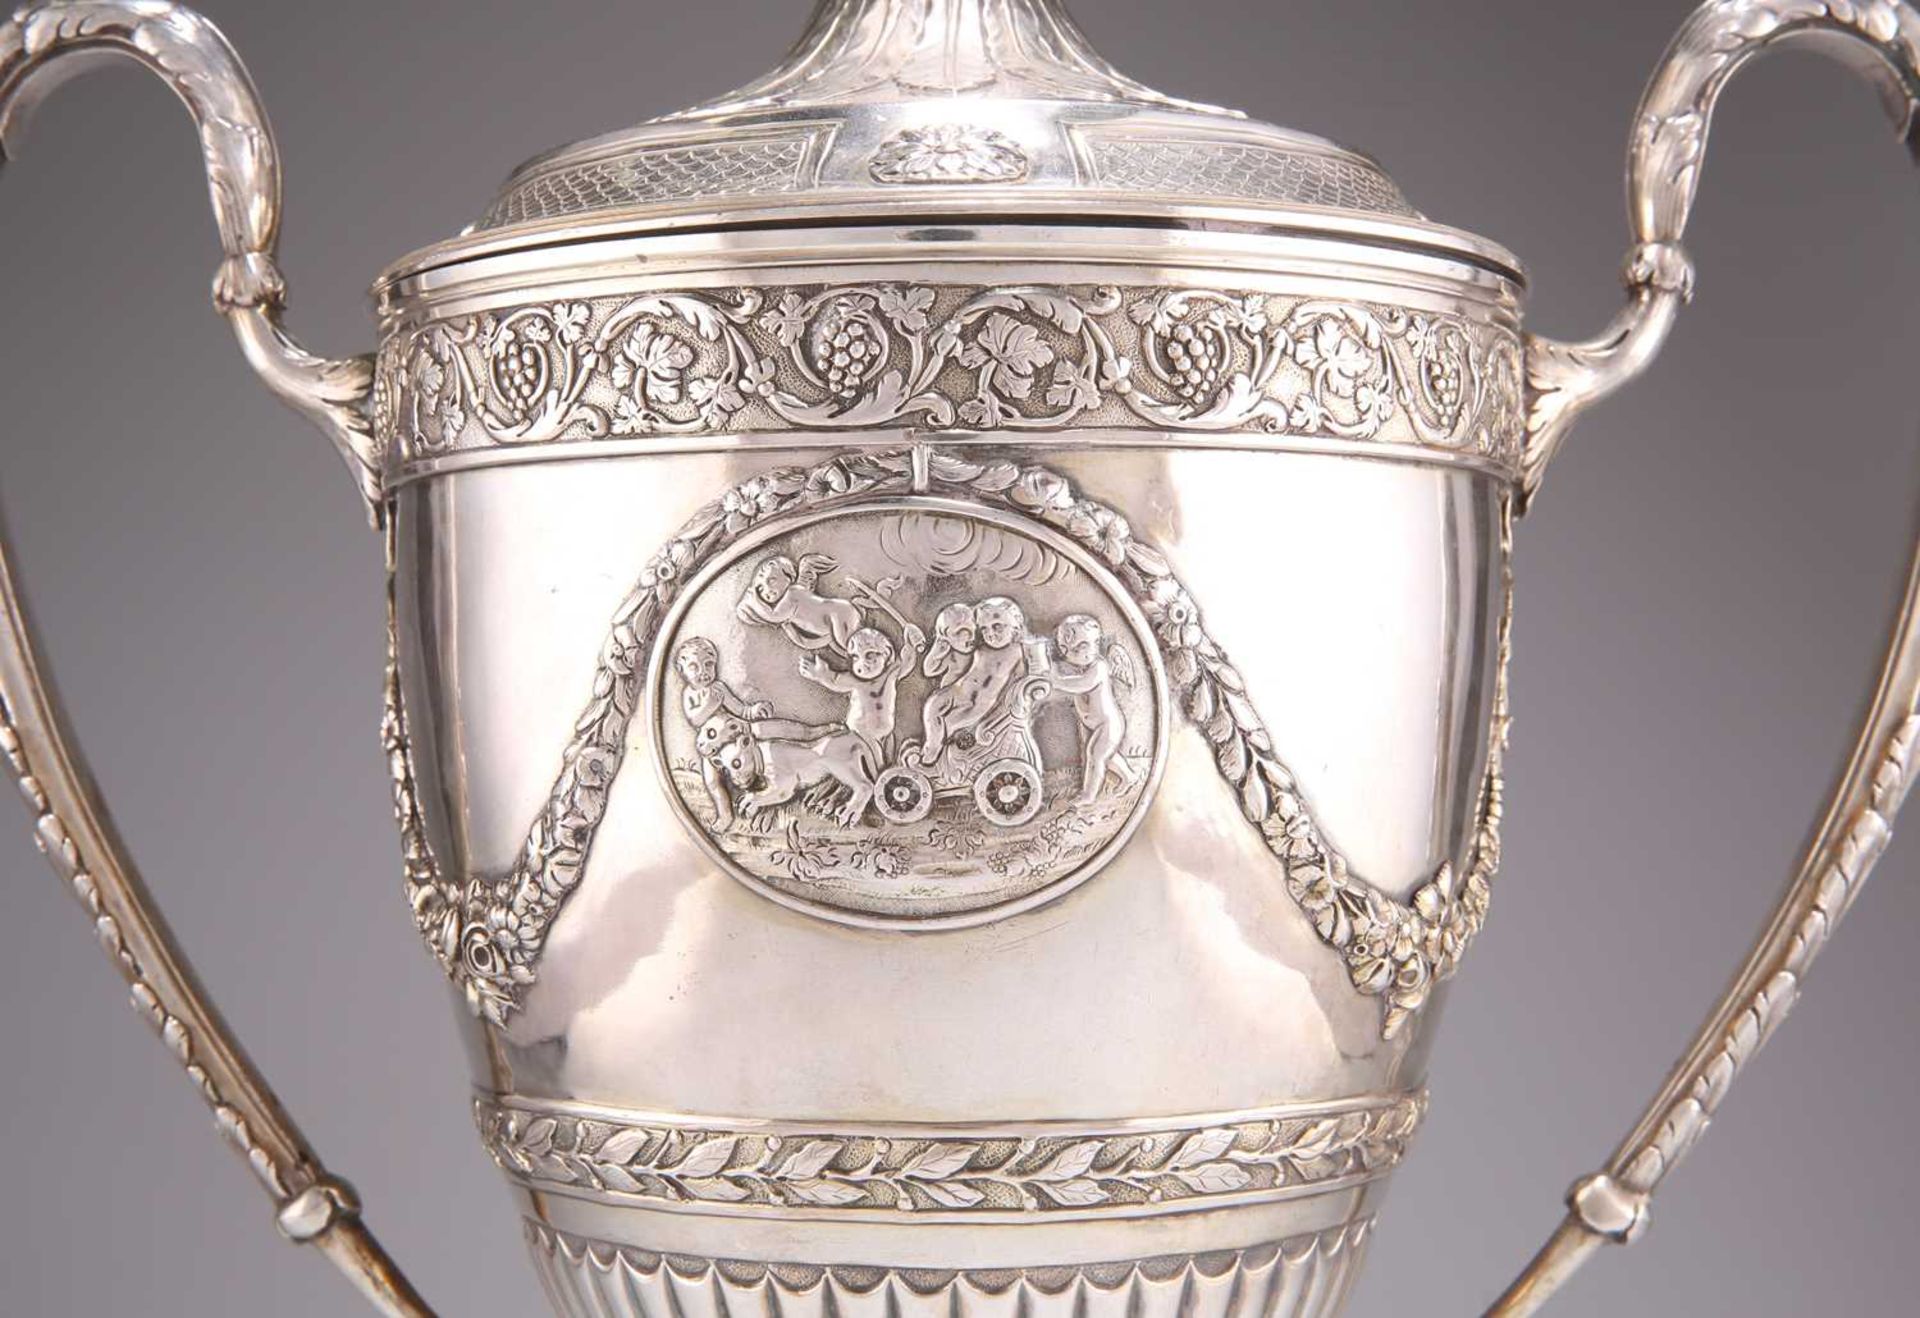 A GEORGE III SILVER-GILT TWO-HANDLED CUP AND COVER - Image 4 of 5